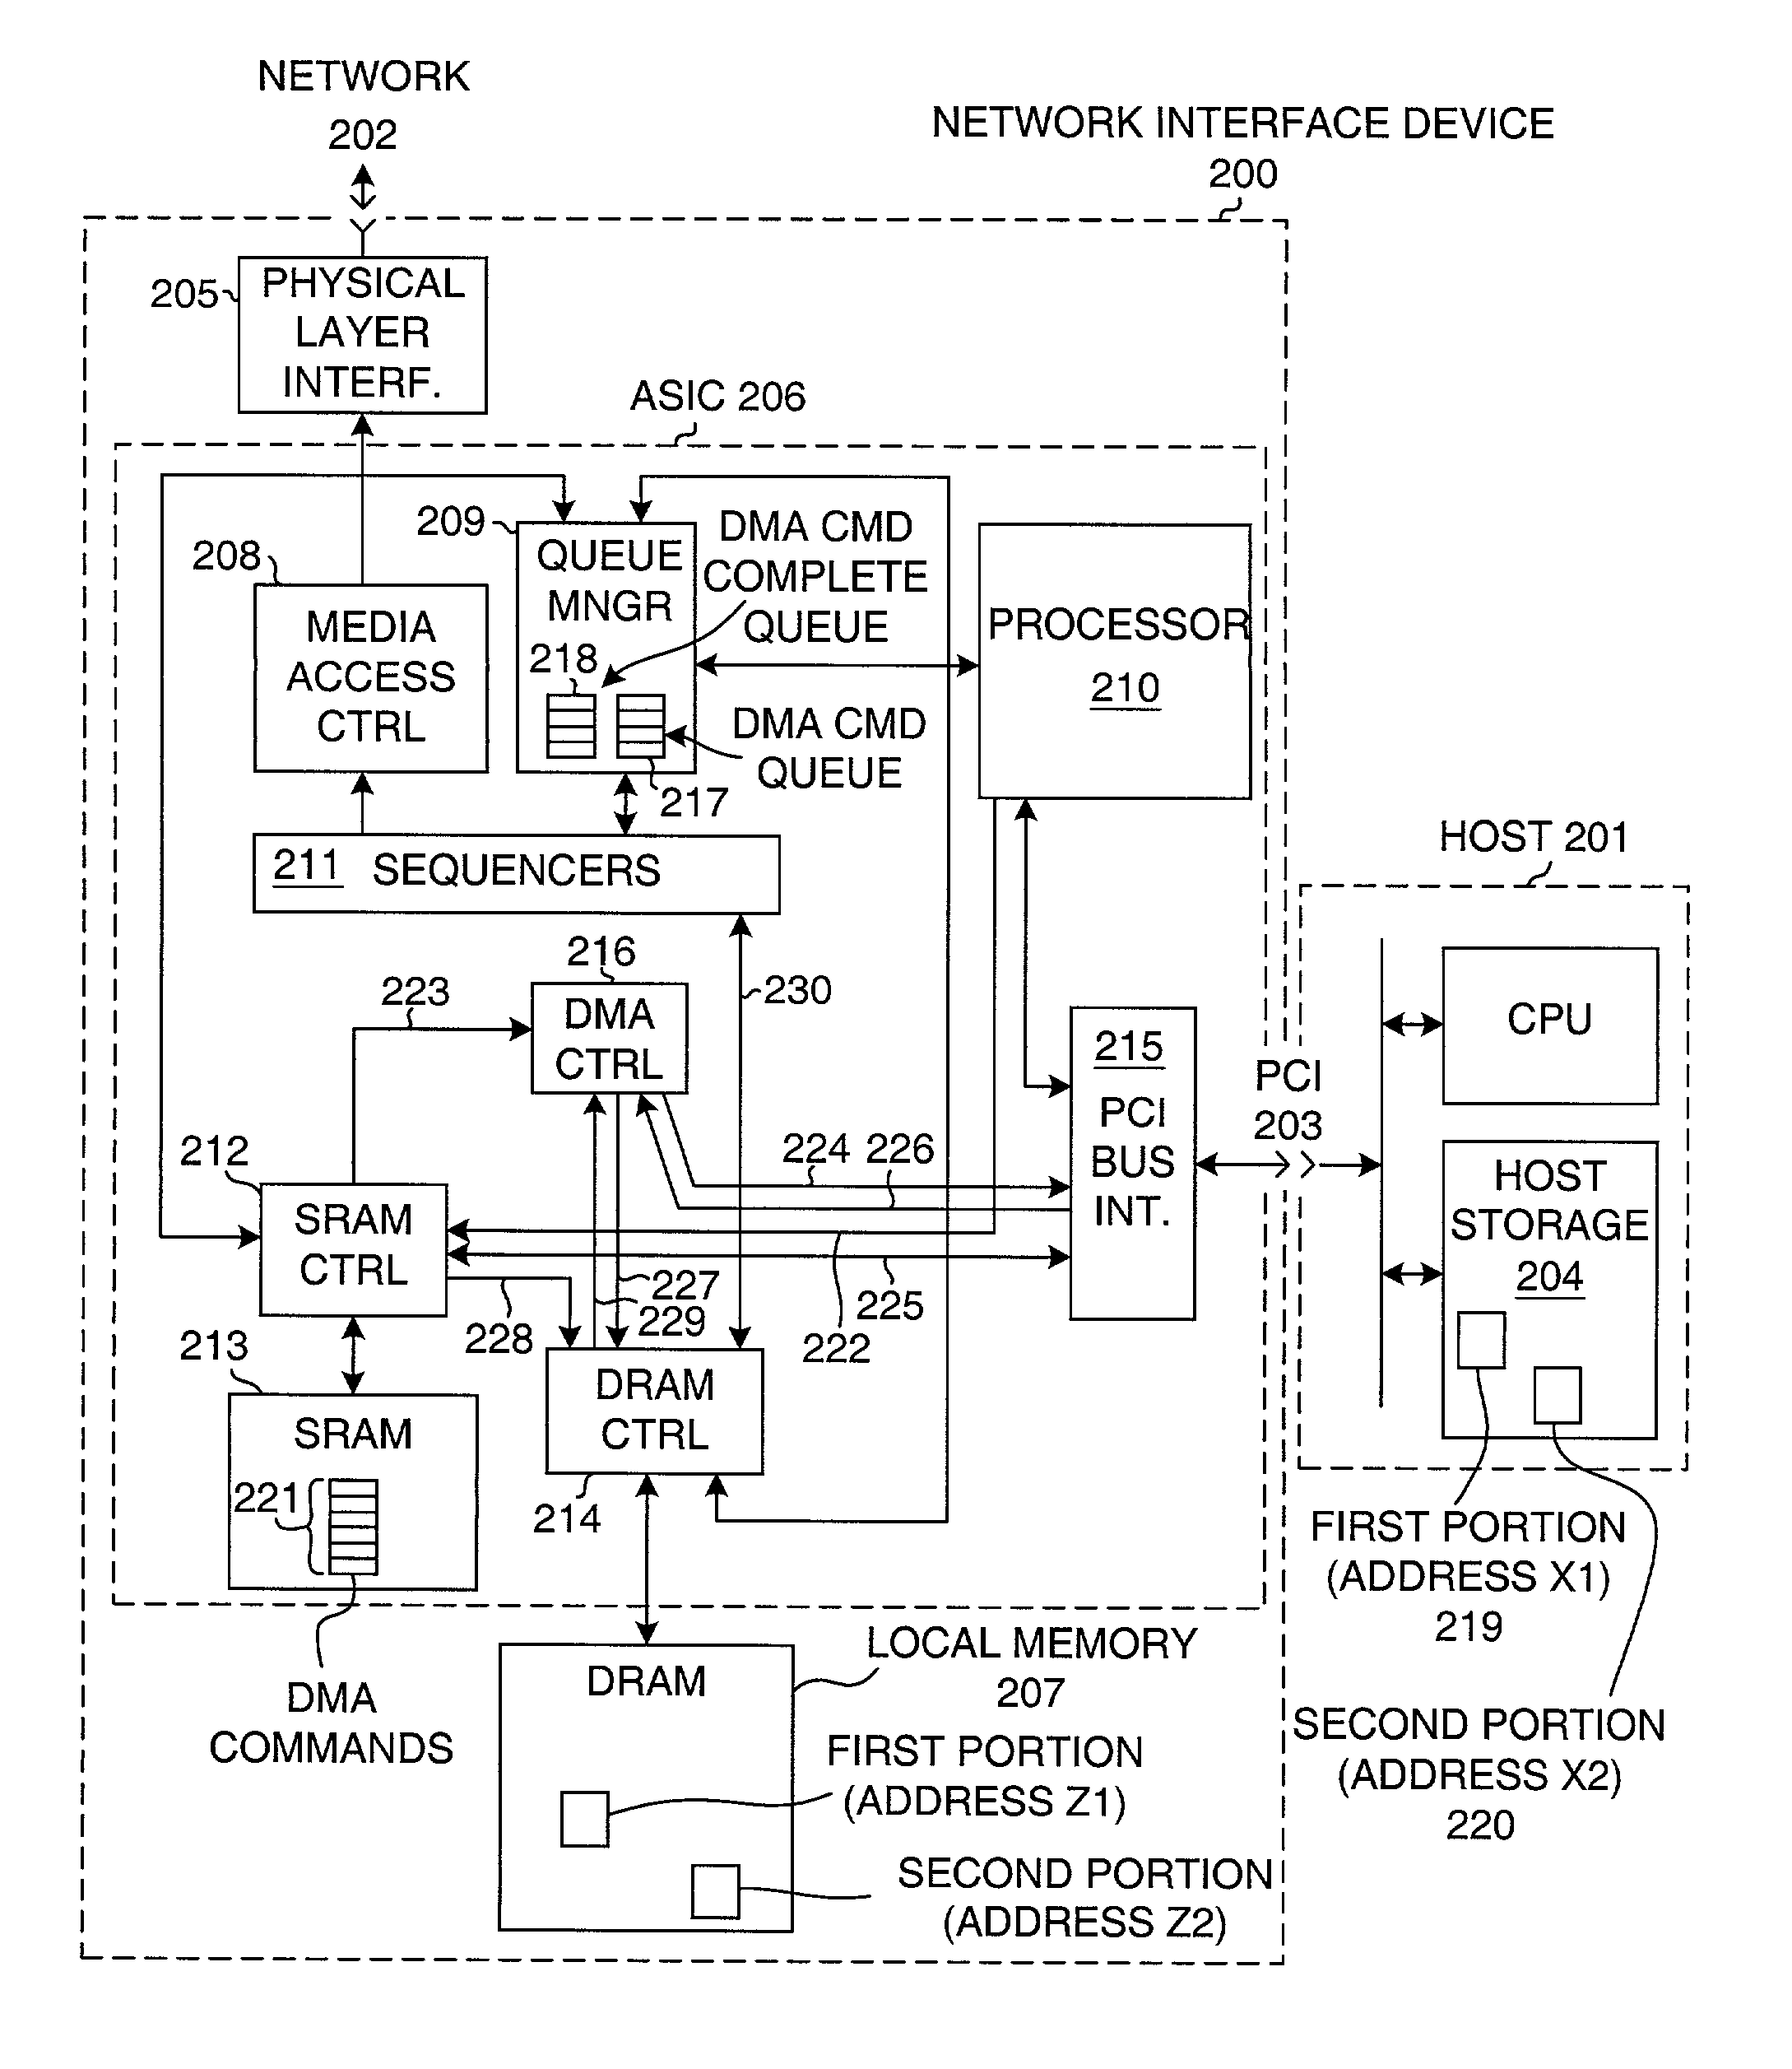 Network interface device employing a DMA command queue